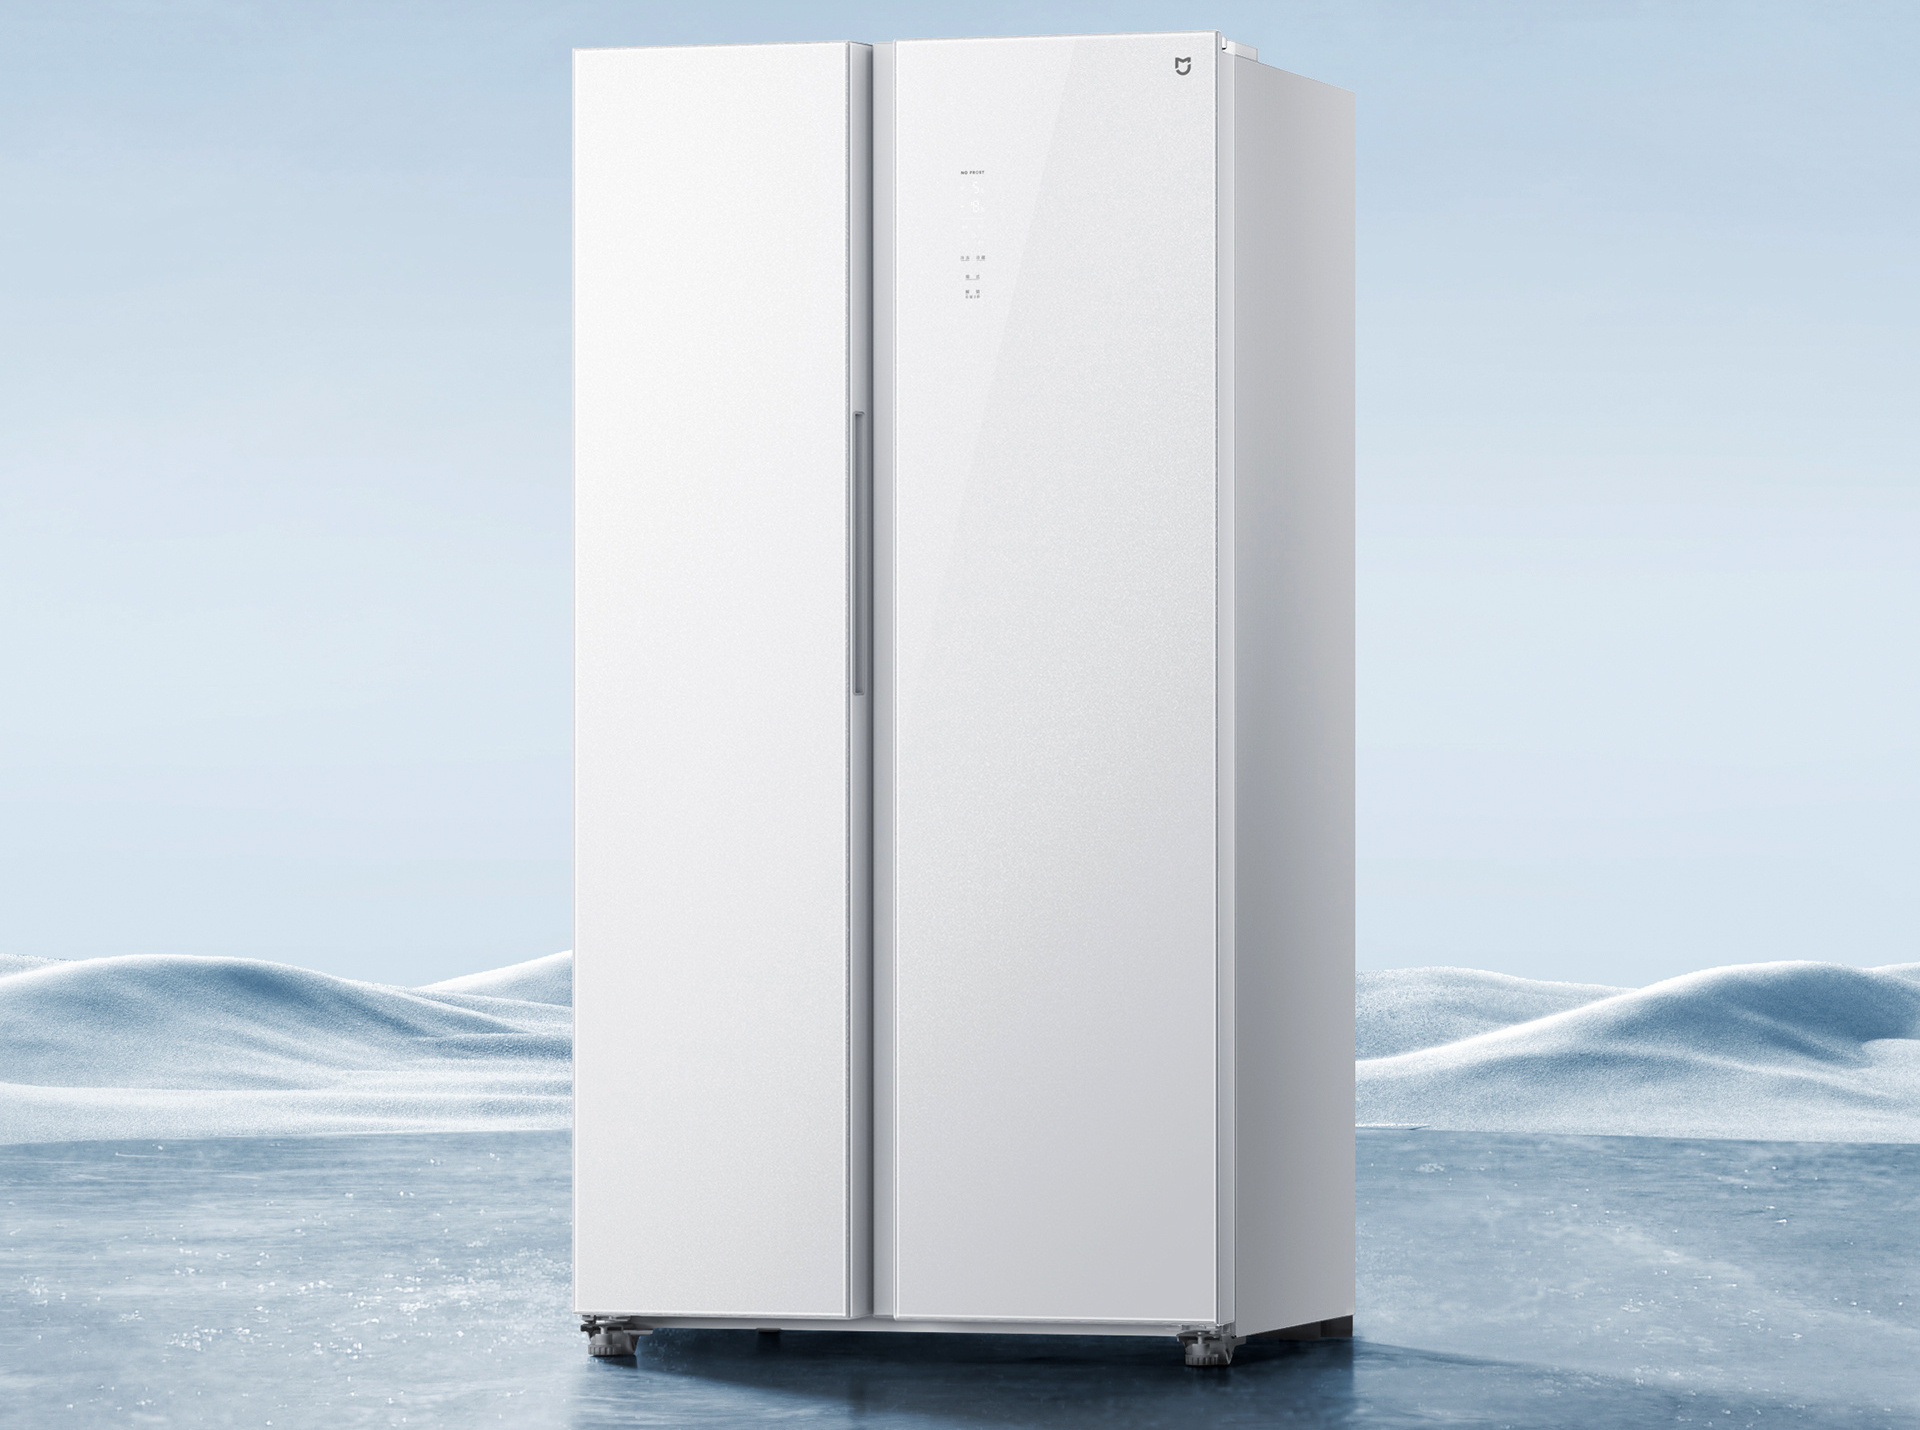 Huge smart refrigerator Xiaomi Mijia Side-by-side 610L Ice Crystal White with a gift went on sale in China